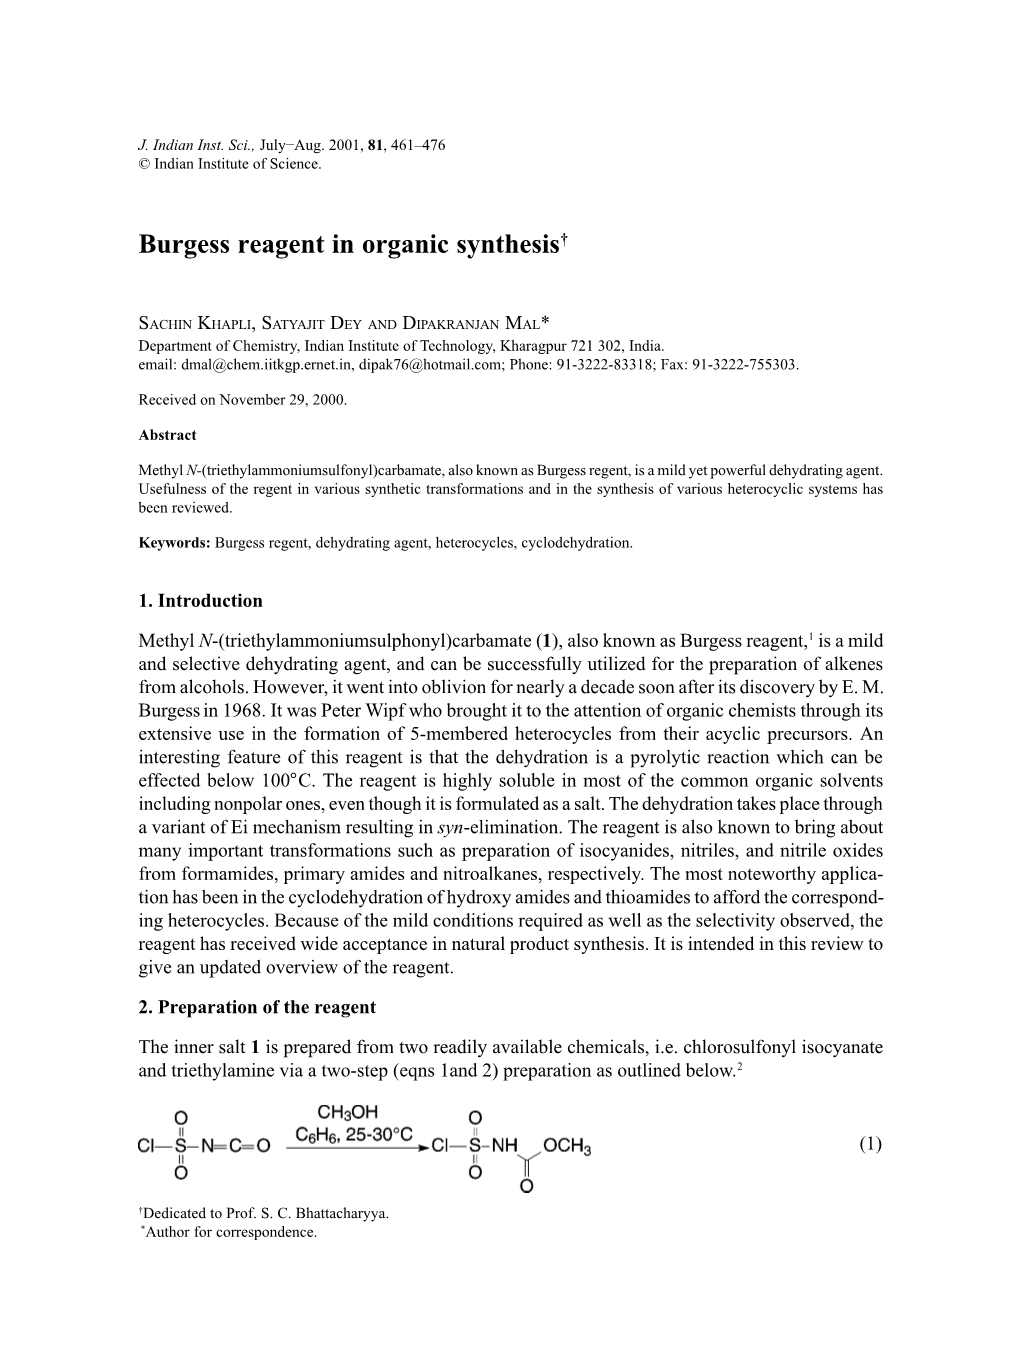 Burgess Reagent in Organic Synthesis†